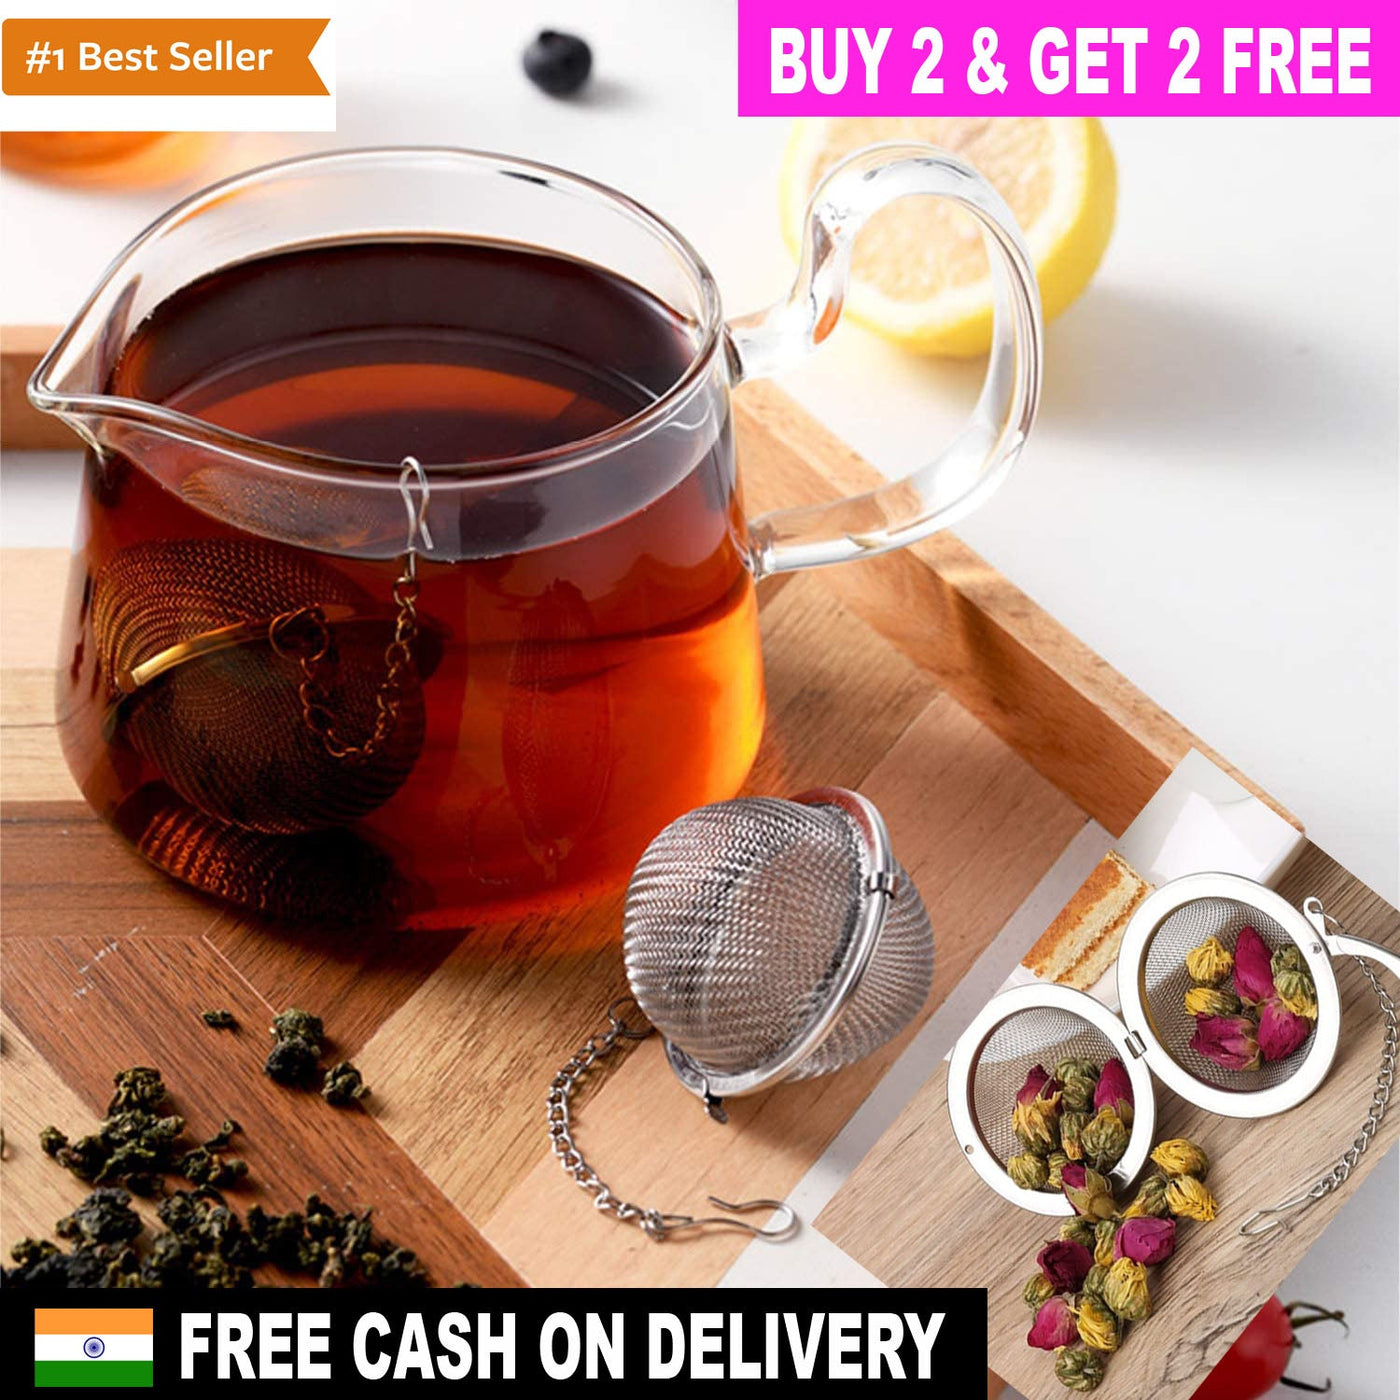 Stainless Steel Tea Diffuser - Premium Quality Great Happy IN BUY 2 GET 2 FREE (Total 4pcs - ₹899) 